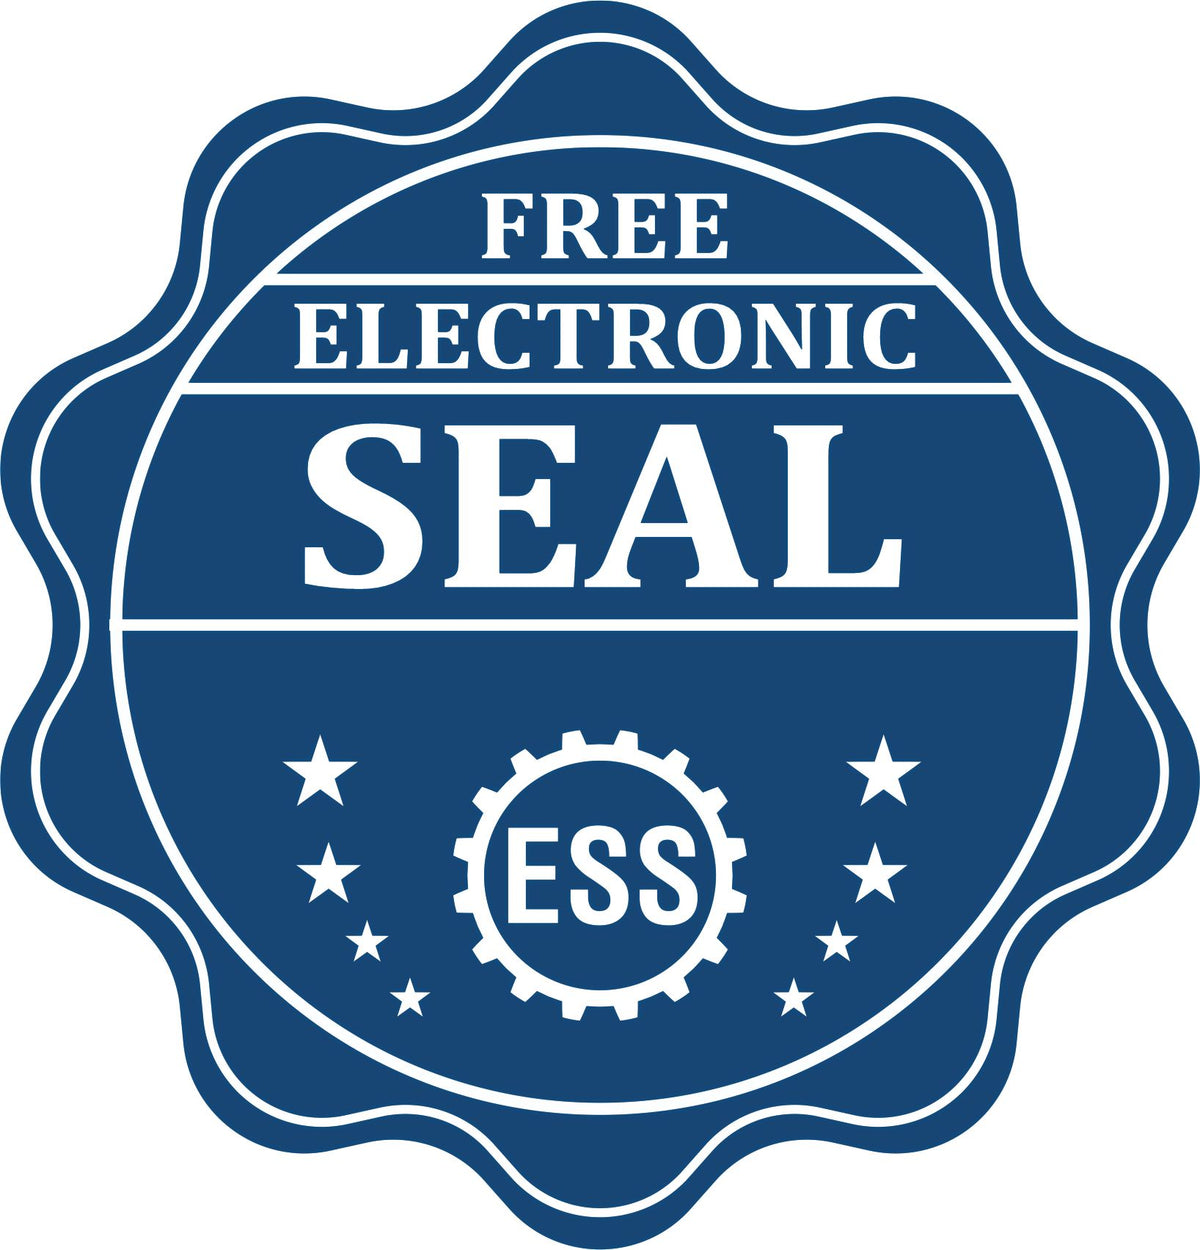 A badge showing a free electronic seal for the MaxLight Premium Pre-Inked South Carolina State Seal Notarial Stamp with stars and the ESS gear on the emblem.